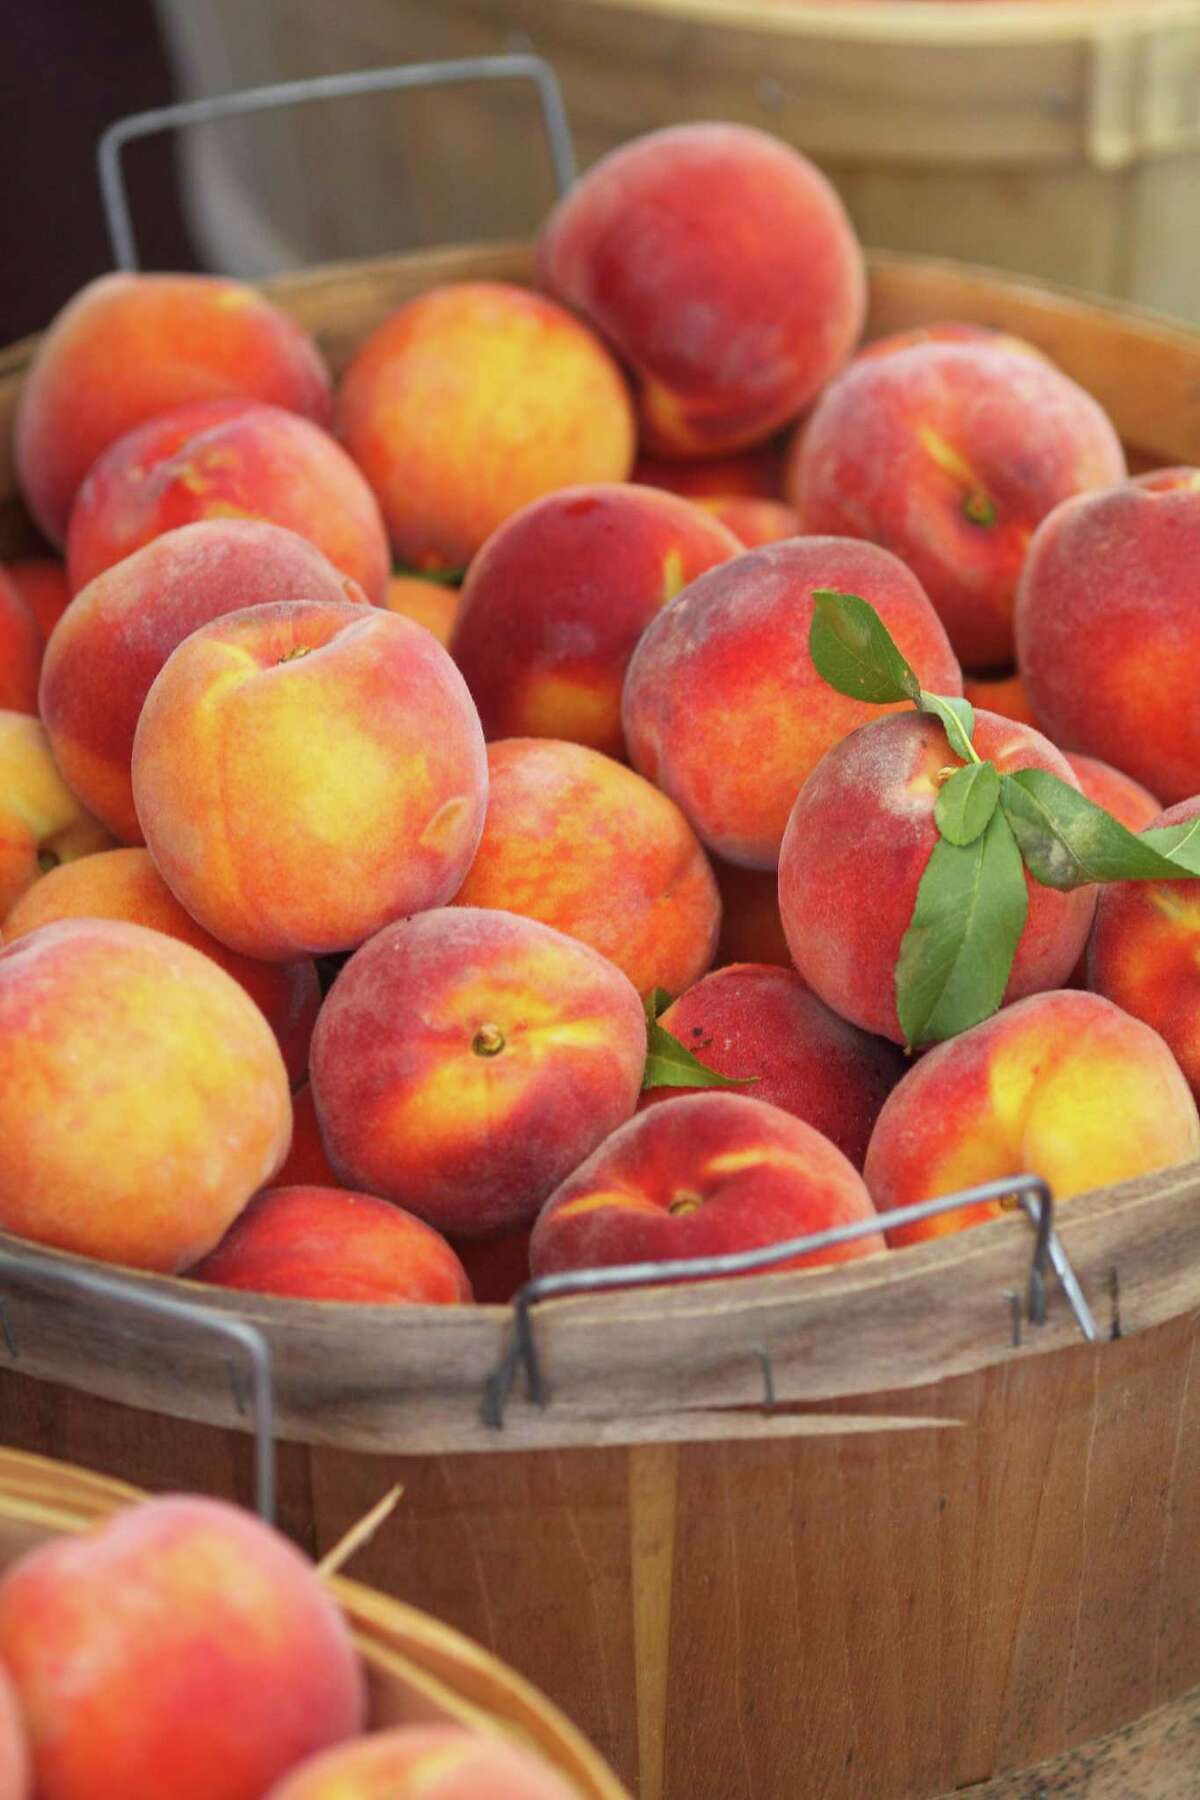 You can ripen hard peaches on the counter or in a paper bag for even faster results.